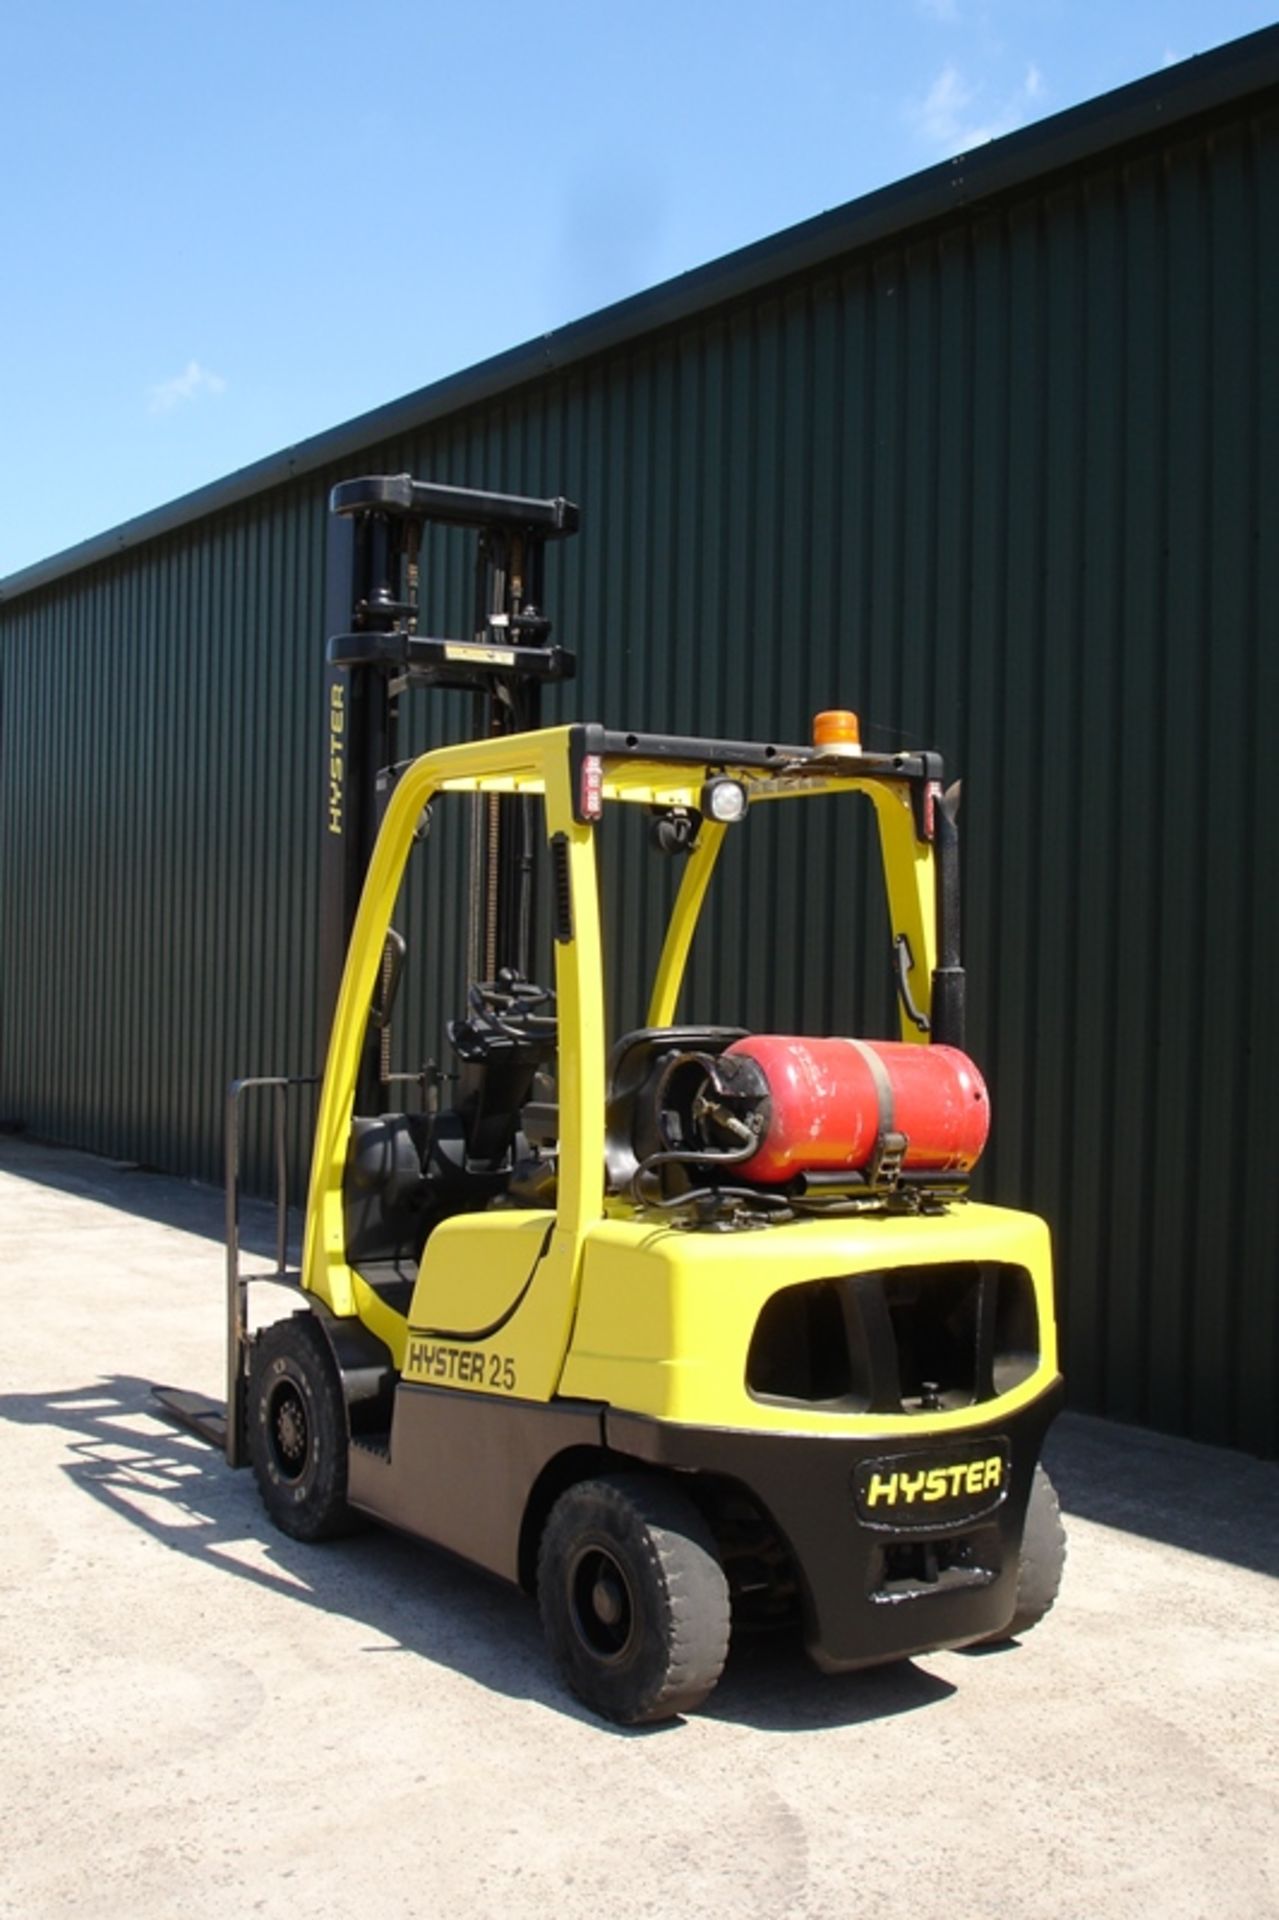 Hyster 2.5 Ton Forklift - Image 2 of 5